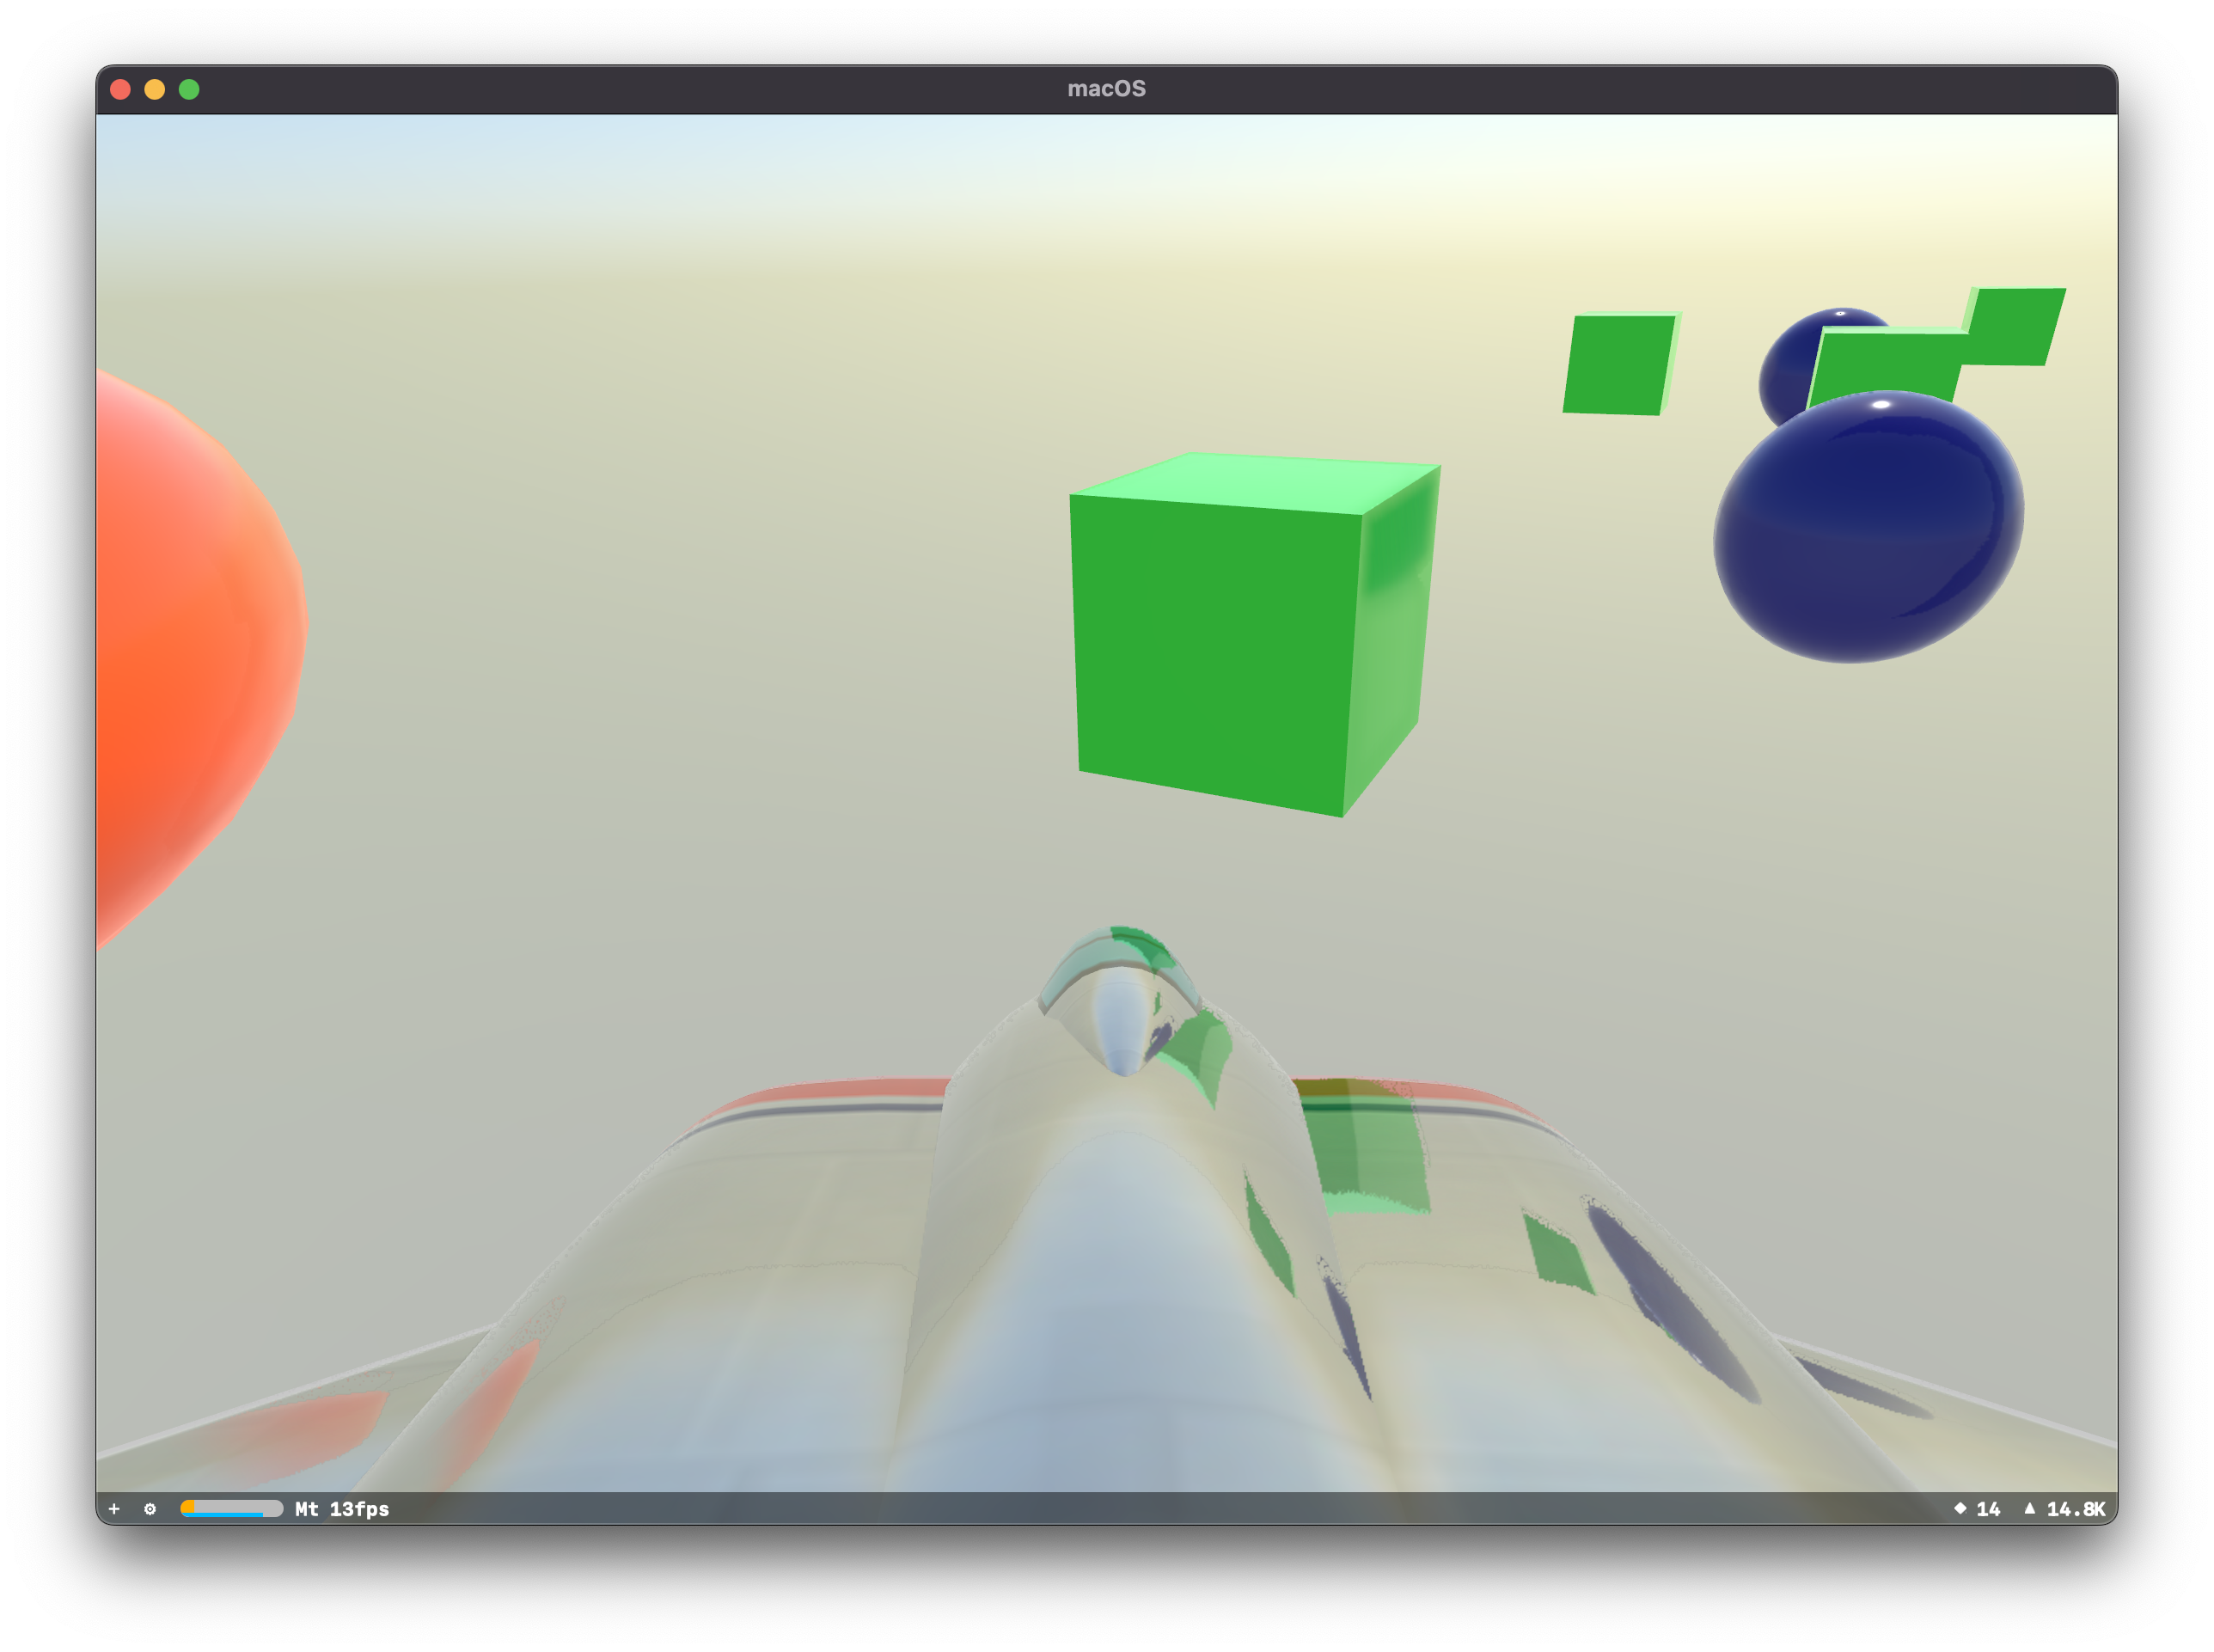 The SceneKit scene with the Jet Model showing the red torus, green cubes, and blue spheres